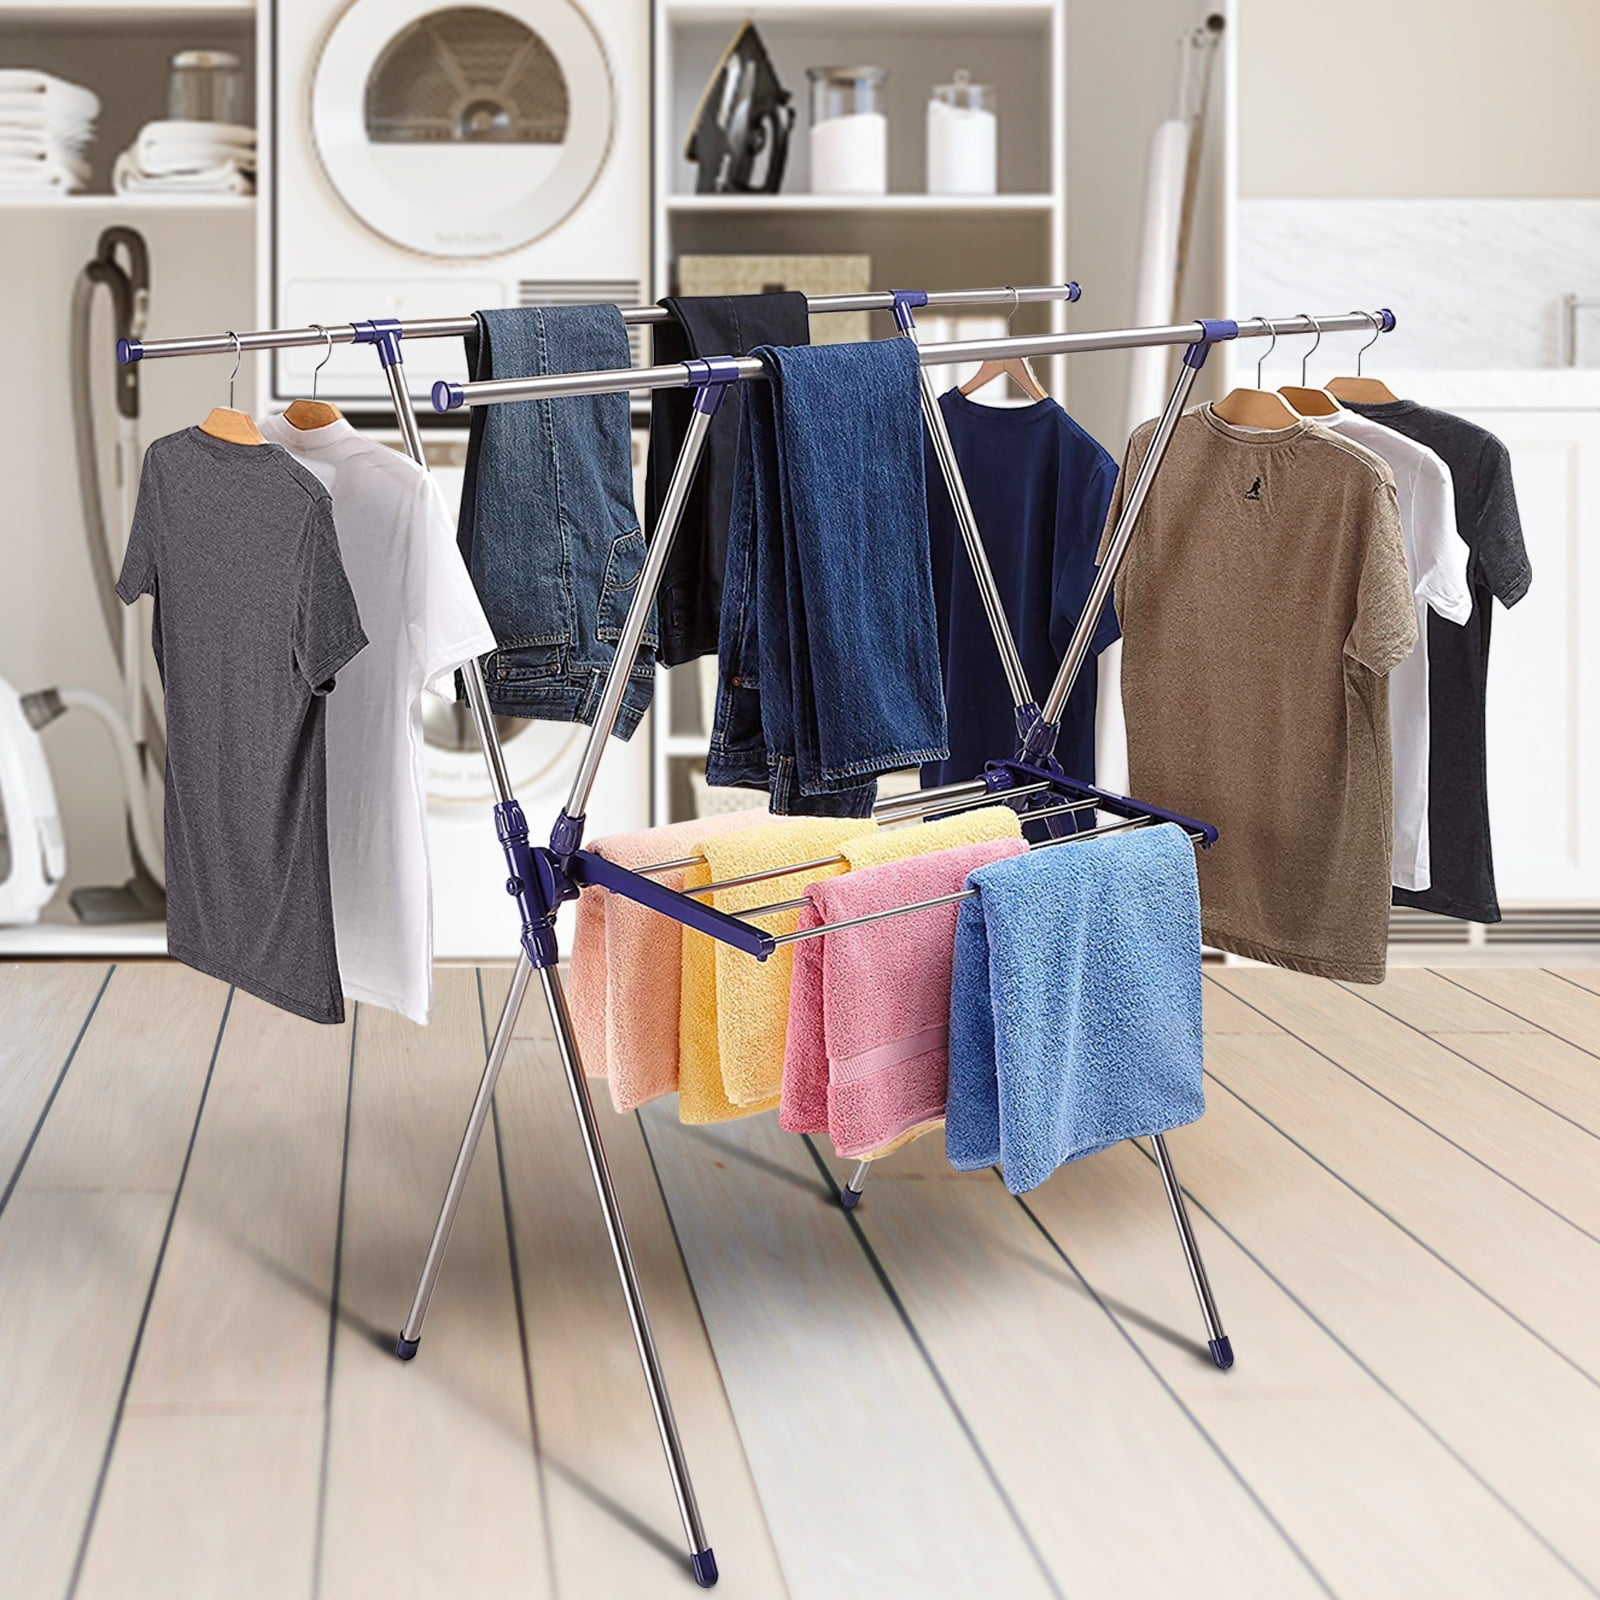 Round Tripod Clothes Drying Rack